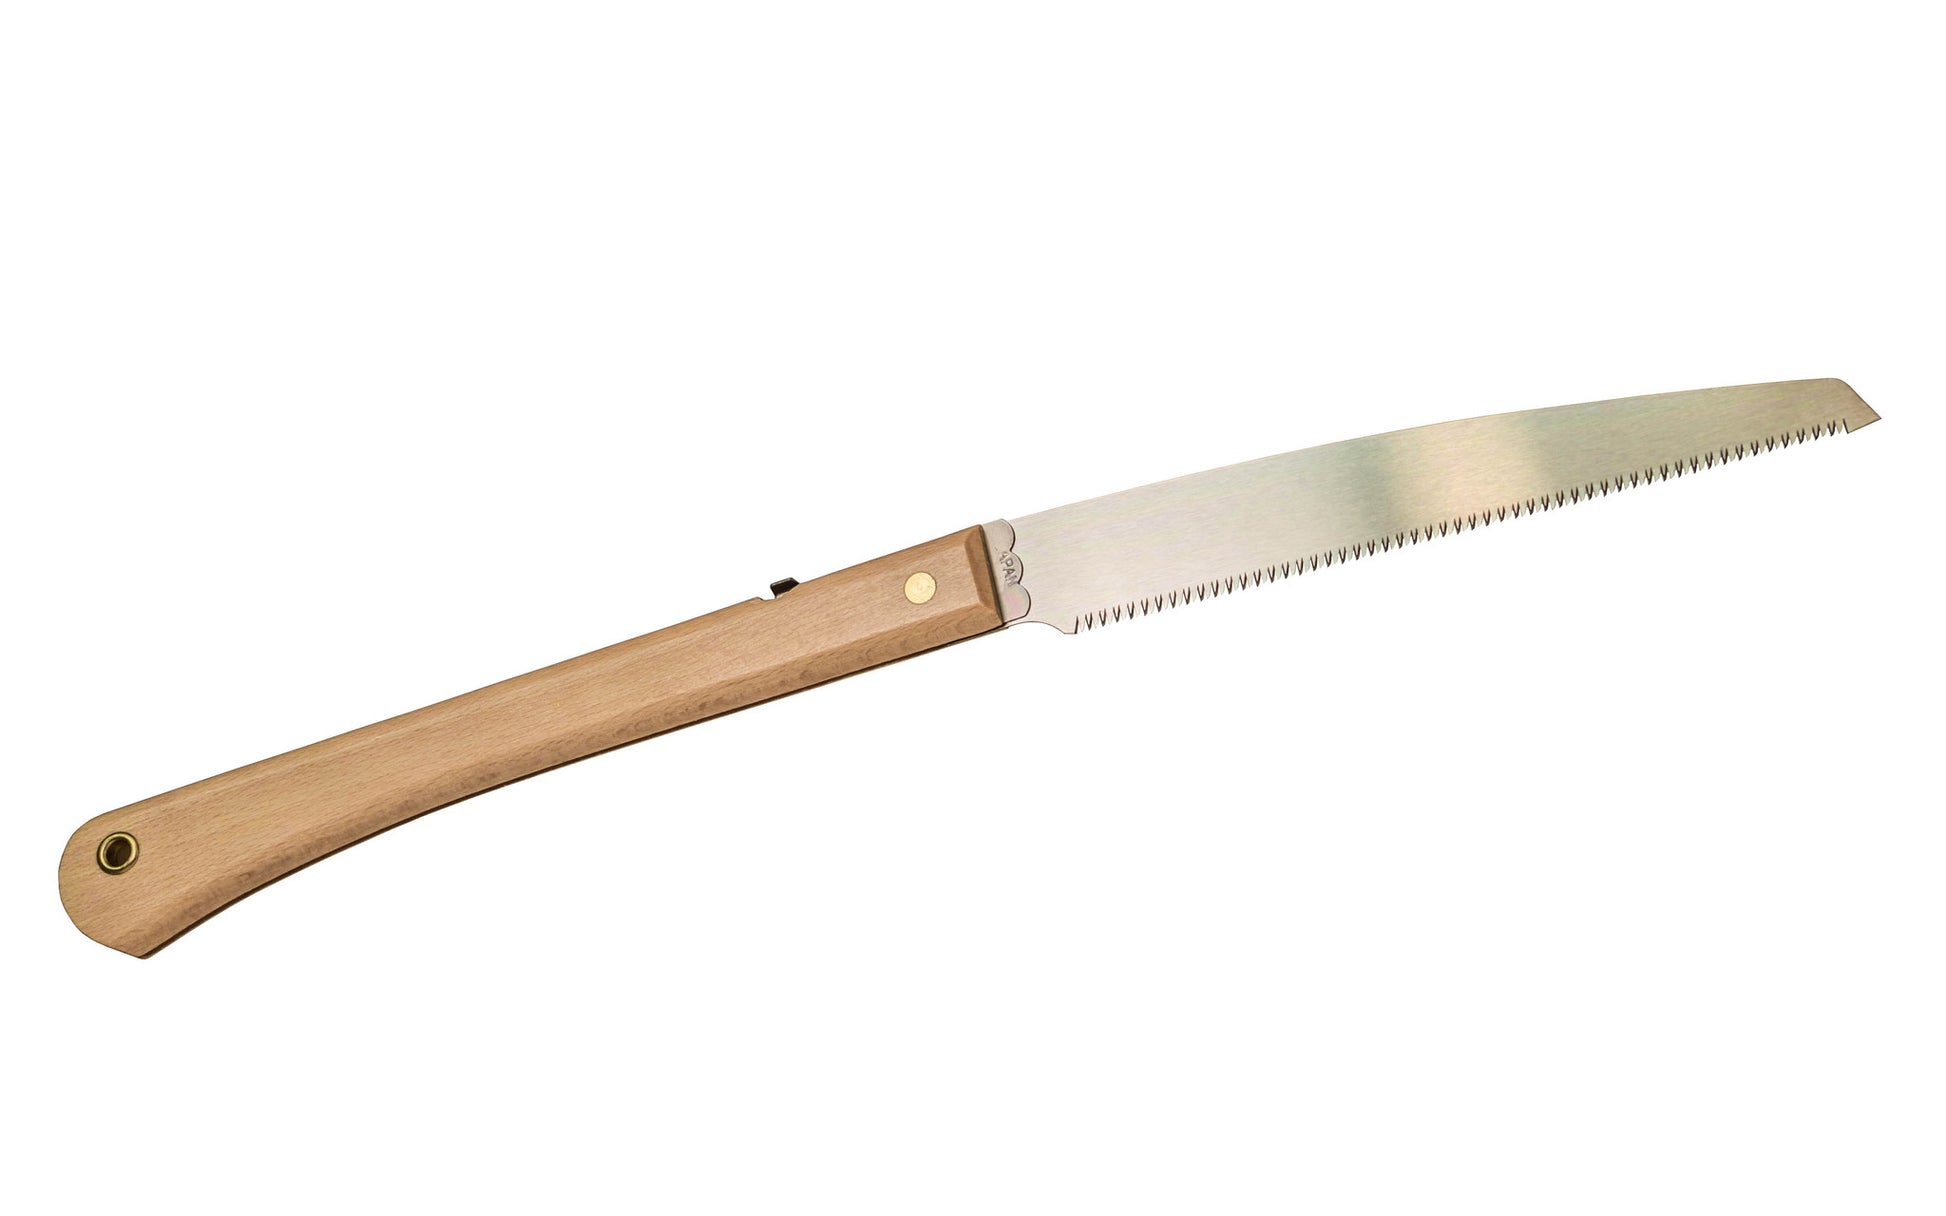 Made in Japan · Crosscut Teeth: 15 TPI ~ Good all-purpose saw ~ Foldable blade ~ 1-3/8" narrow blade - good for tight areas Brass riveted in a Beechwood handle with lanyard hole ~ Japanese pull-saw that can be used for general lumber, dry woods, & for green woods. 19" overall length folding pull-saw